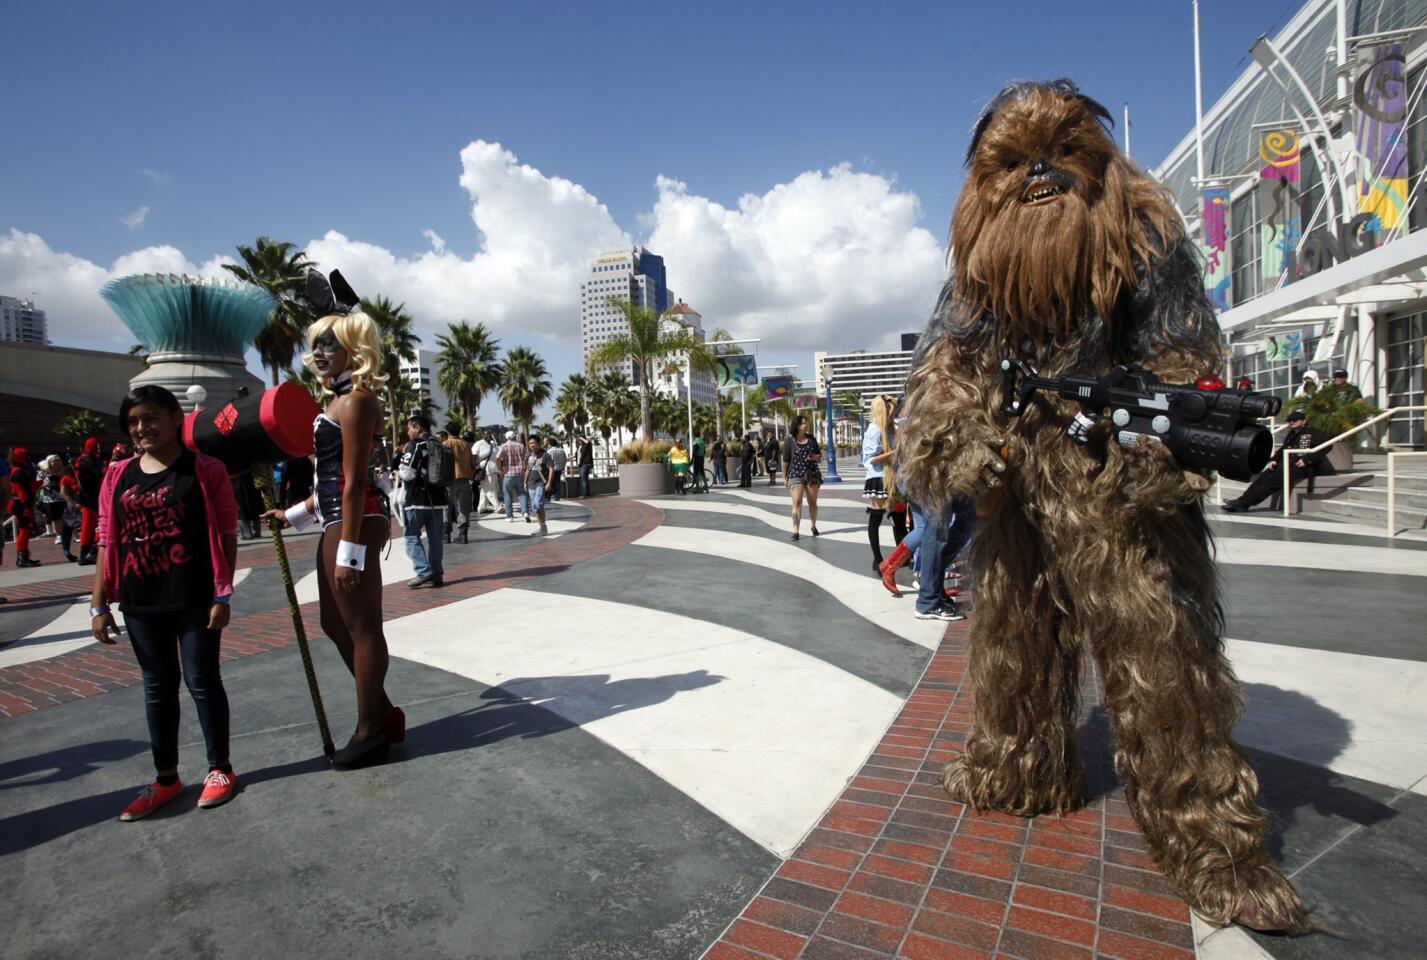 Chewbacca from "Star Wars" makes an appearance at Long Beach Comic Con, held at the Long Beach Convention Center on Saturday.